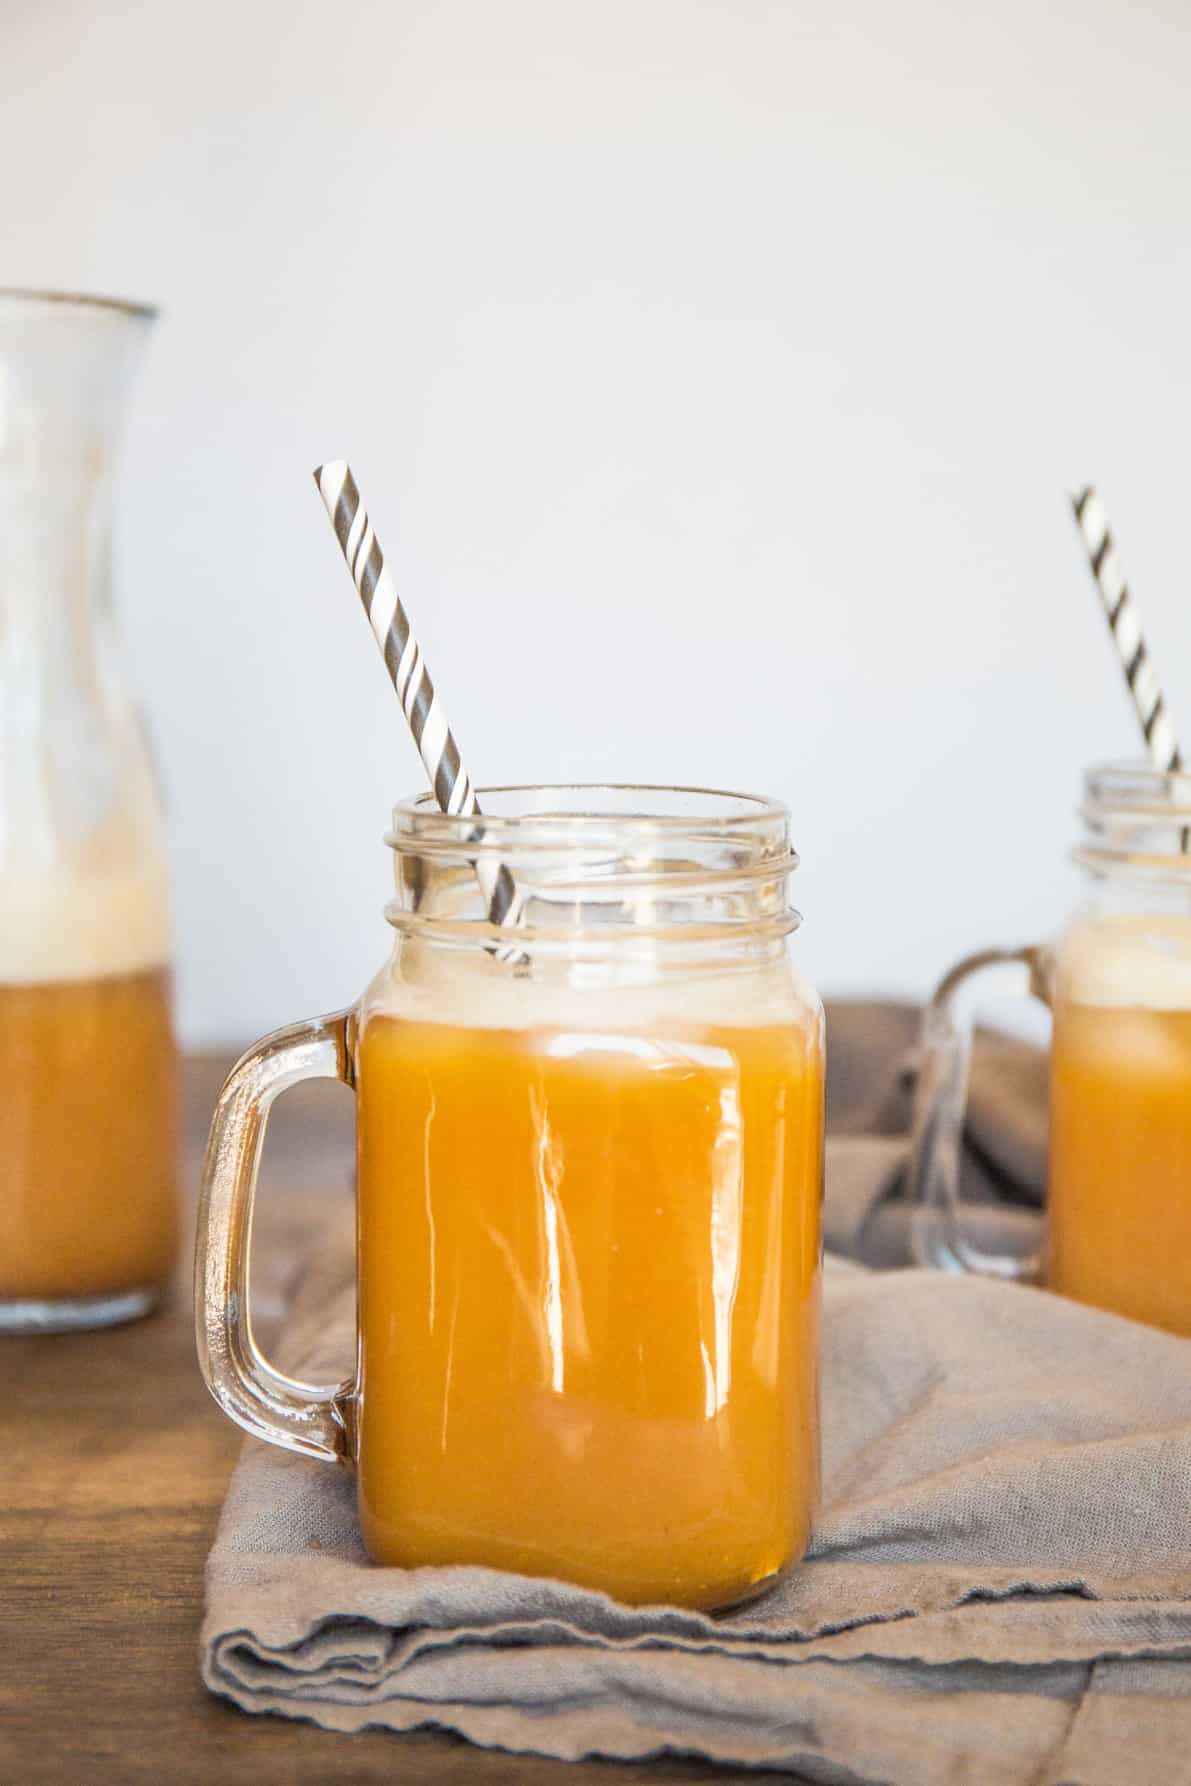 This Harry Potter inspired Pumpkin Juice is the perfect drink to serve at a Halloween party or any gathering. Reminiscent of the holidays, this drink has a unique taste unlike any other.